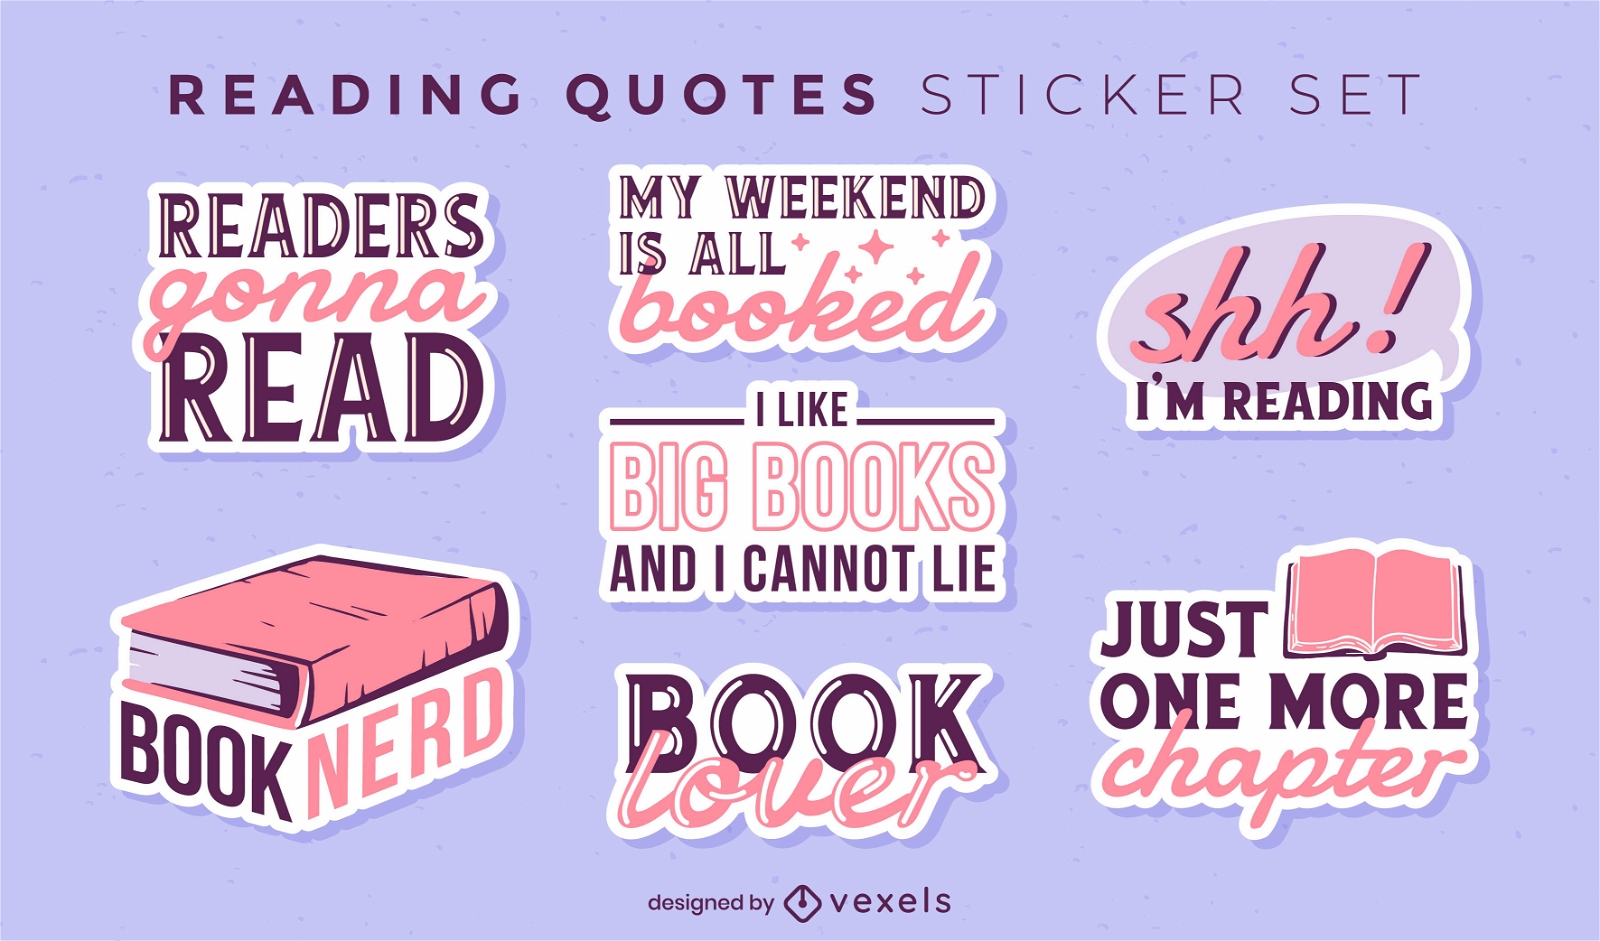 Just One More Chapter Funny Book Lovers Reading Sticker